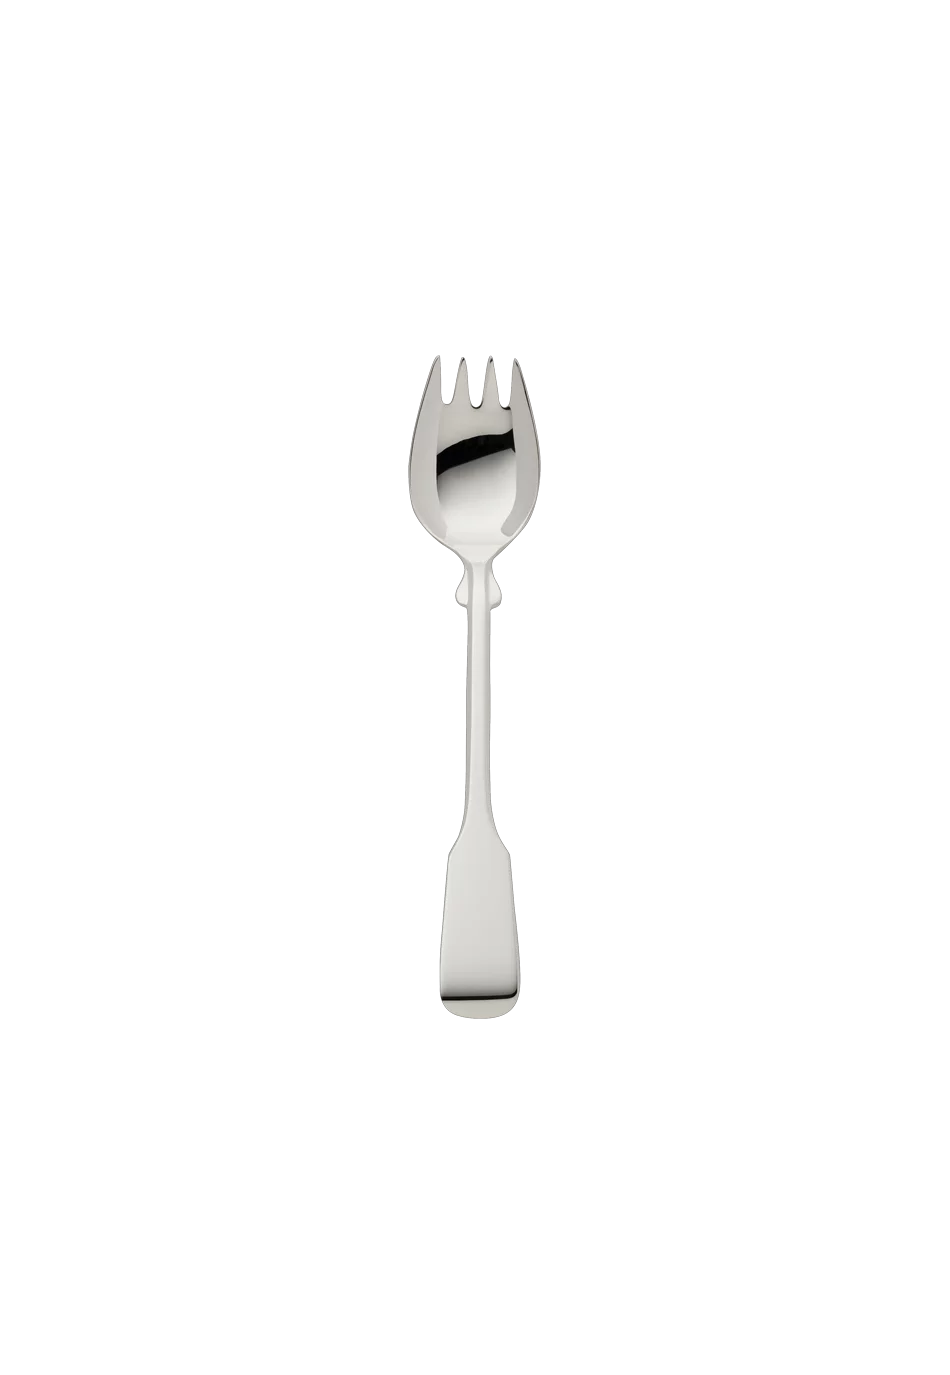 Spaten Oyster Fork (150g massive silverplated)